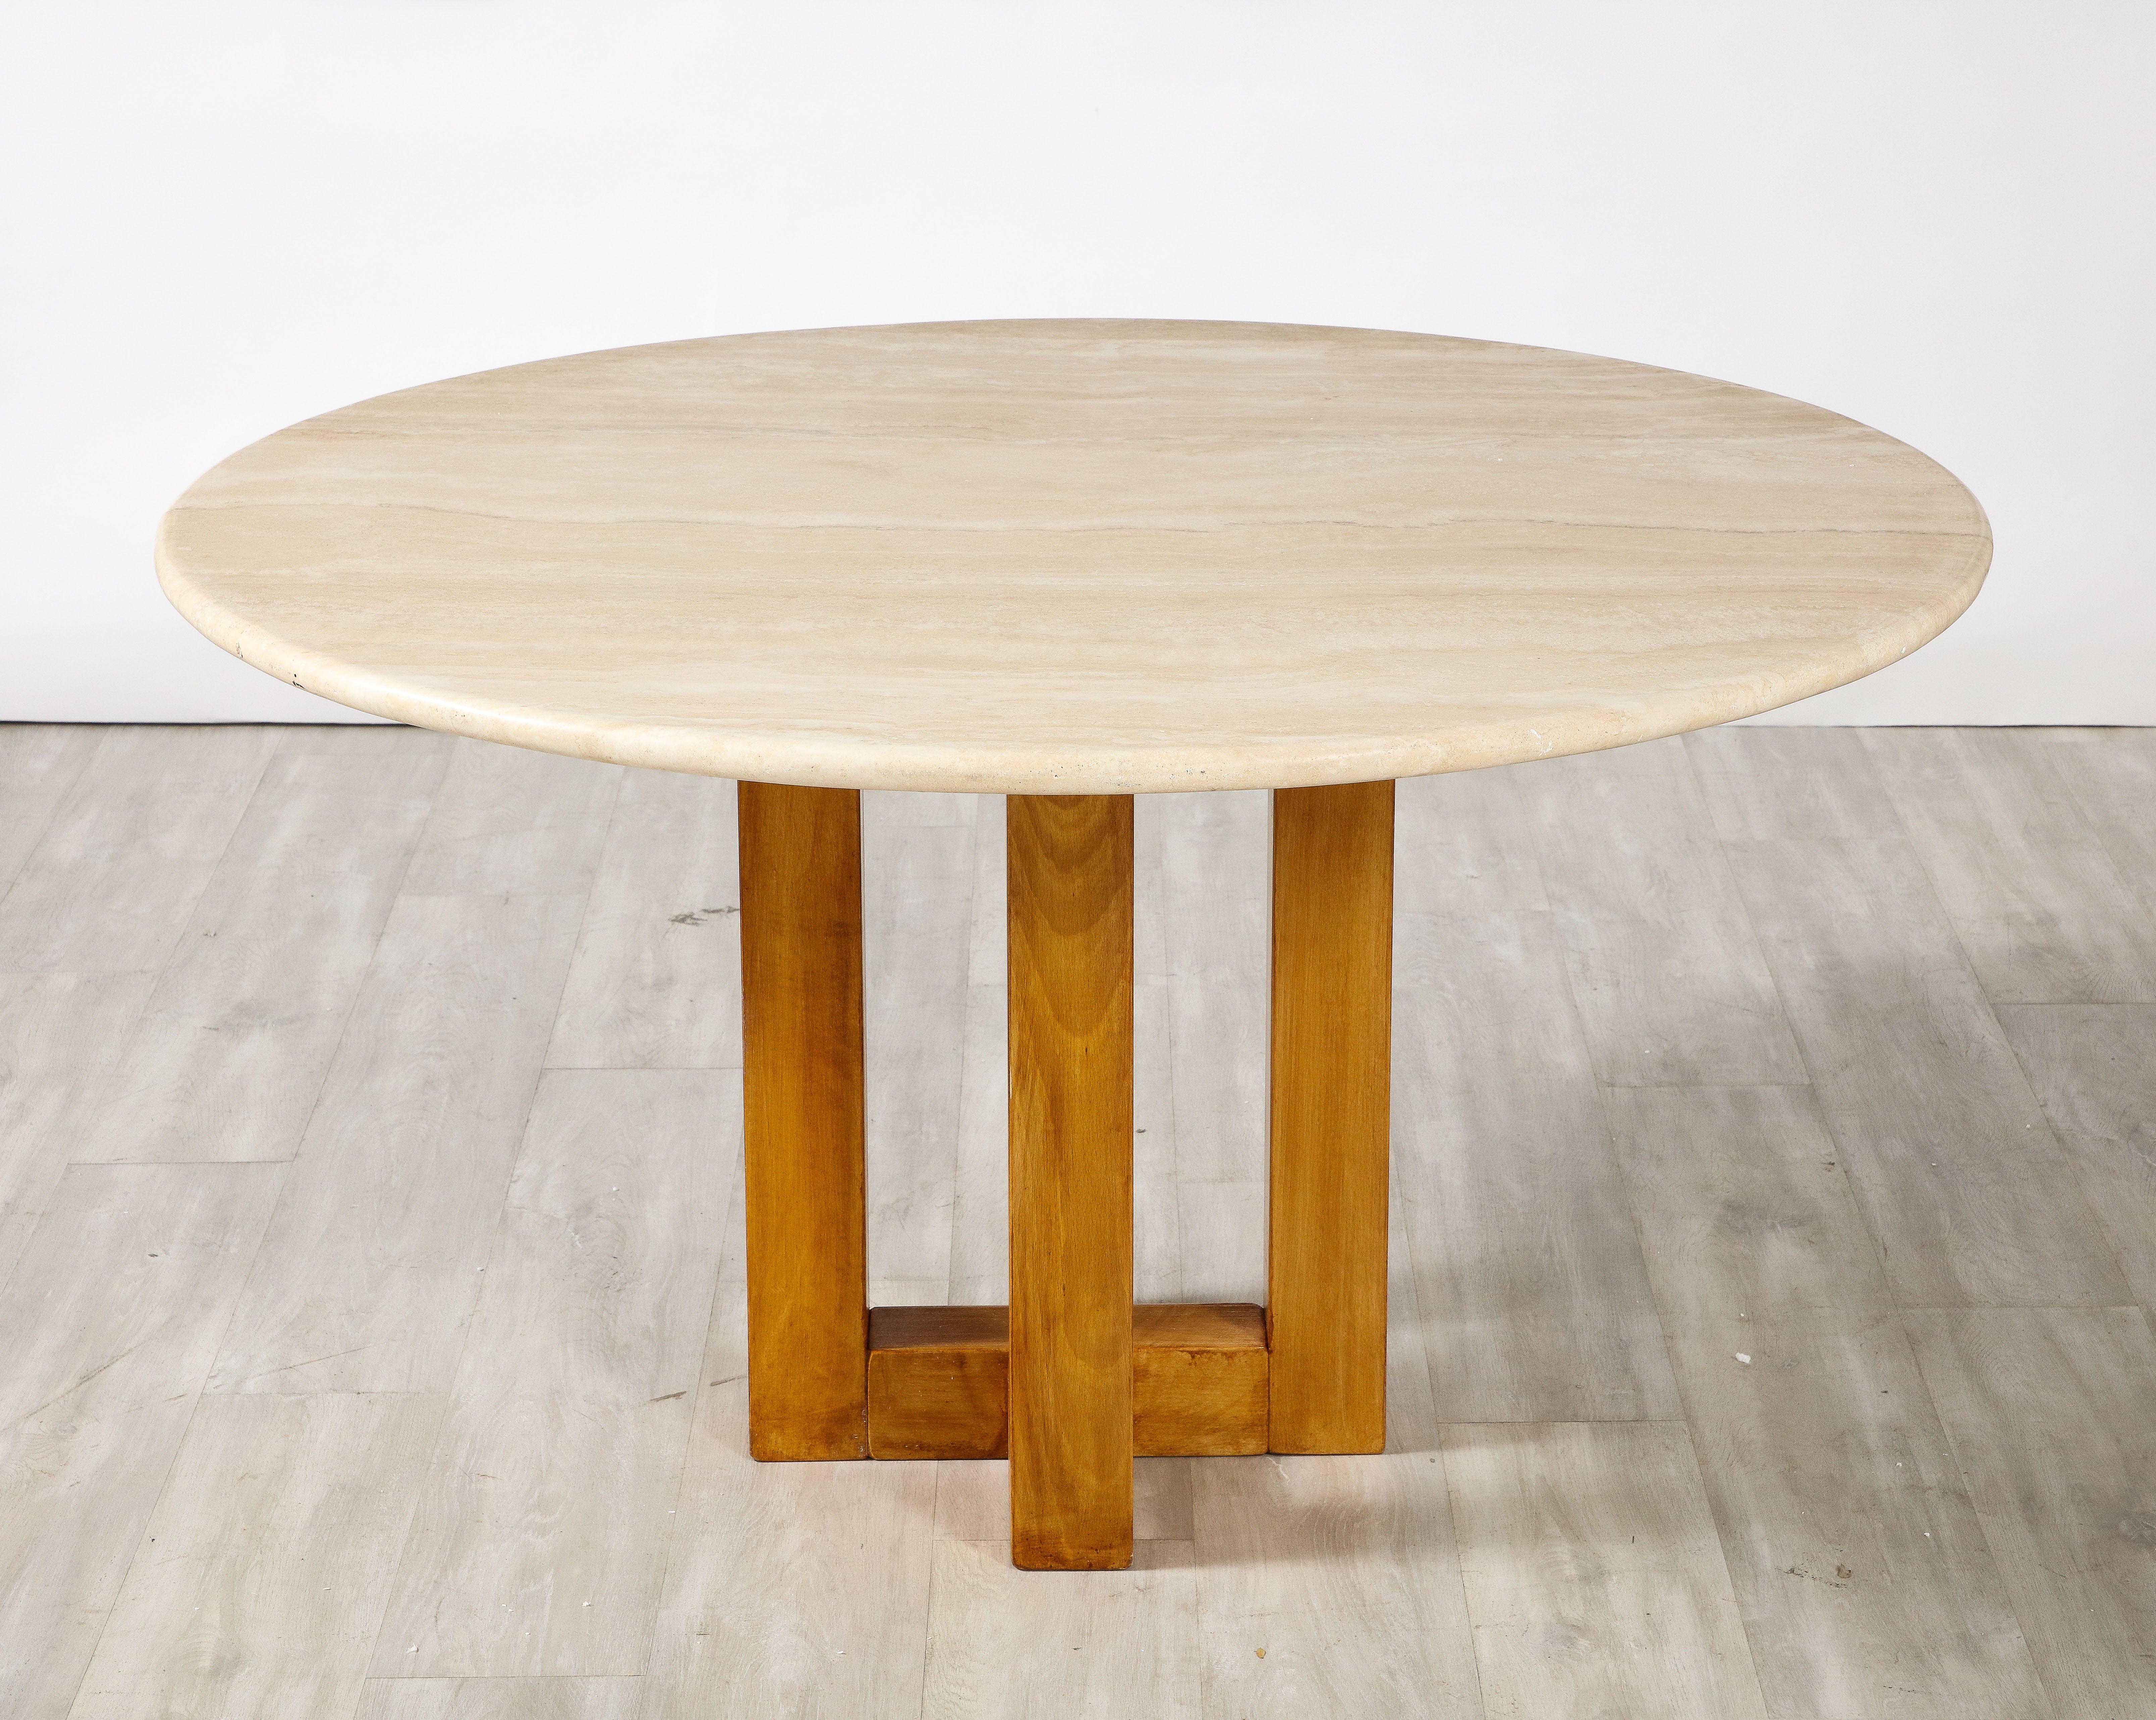 Ferdinando Meccani Travertine, Wood Dining Table or Center Table, Italy, 1970's 
A hand-crafted highly unique dining table or center table with great geometric form, the four square legs contrast beautifully with the circular top.  The legs are